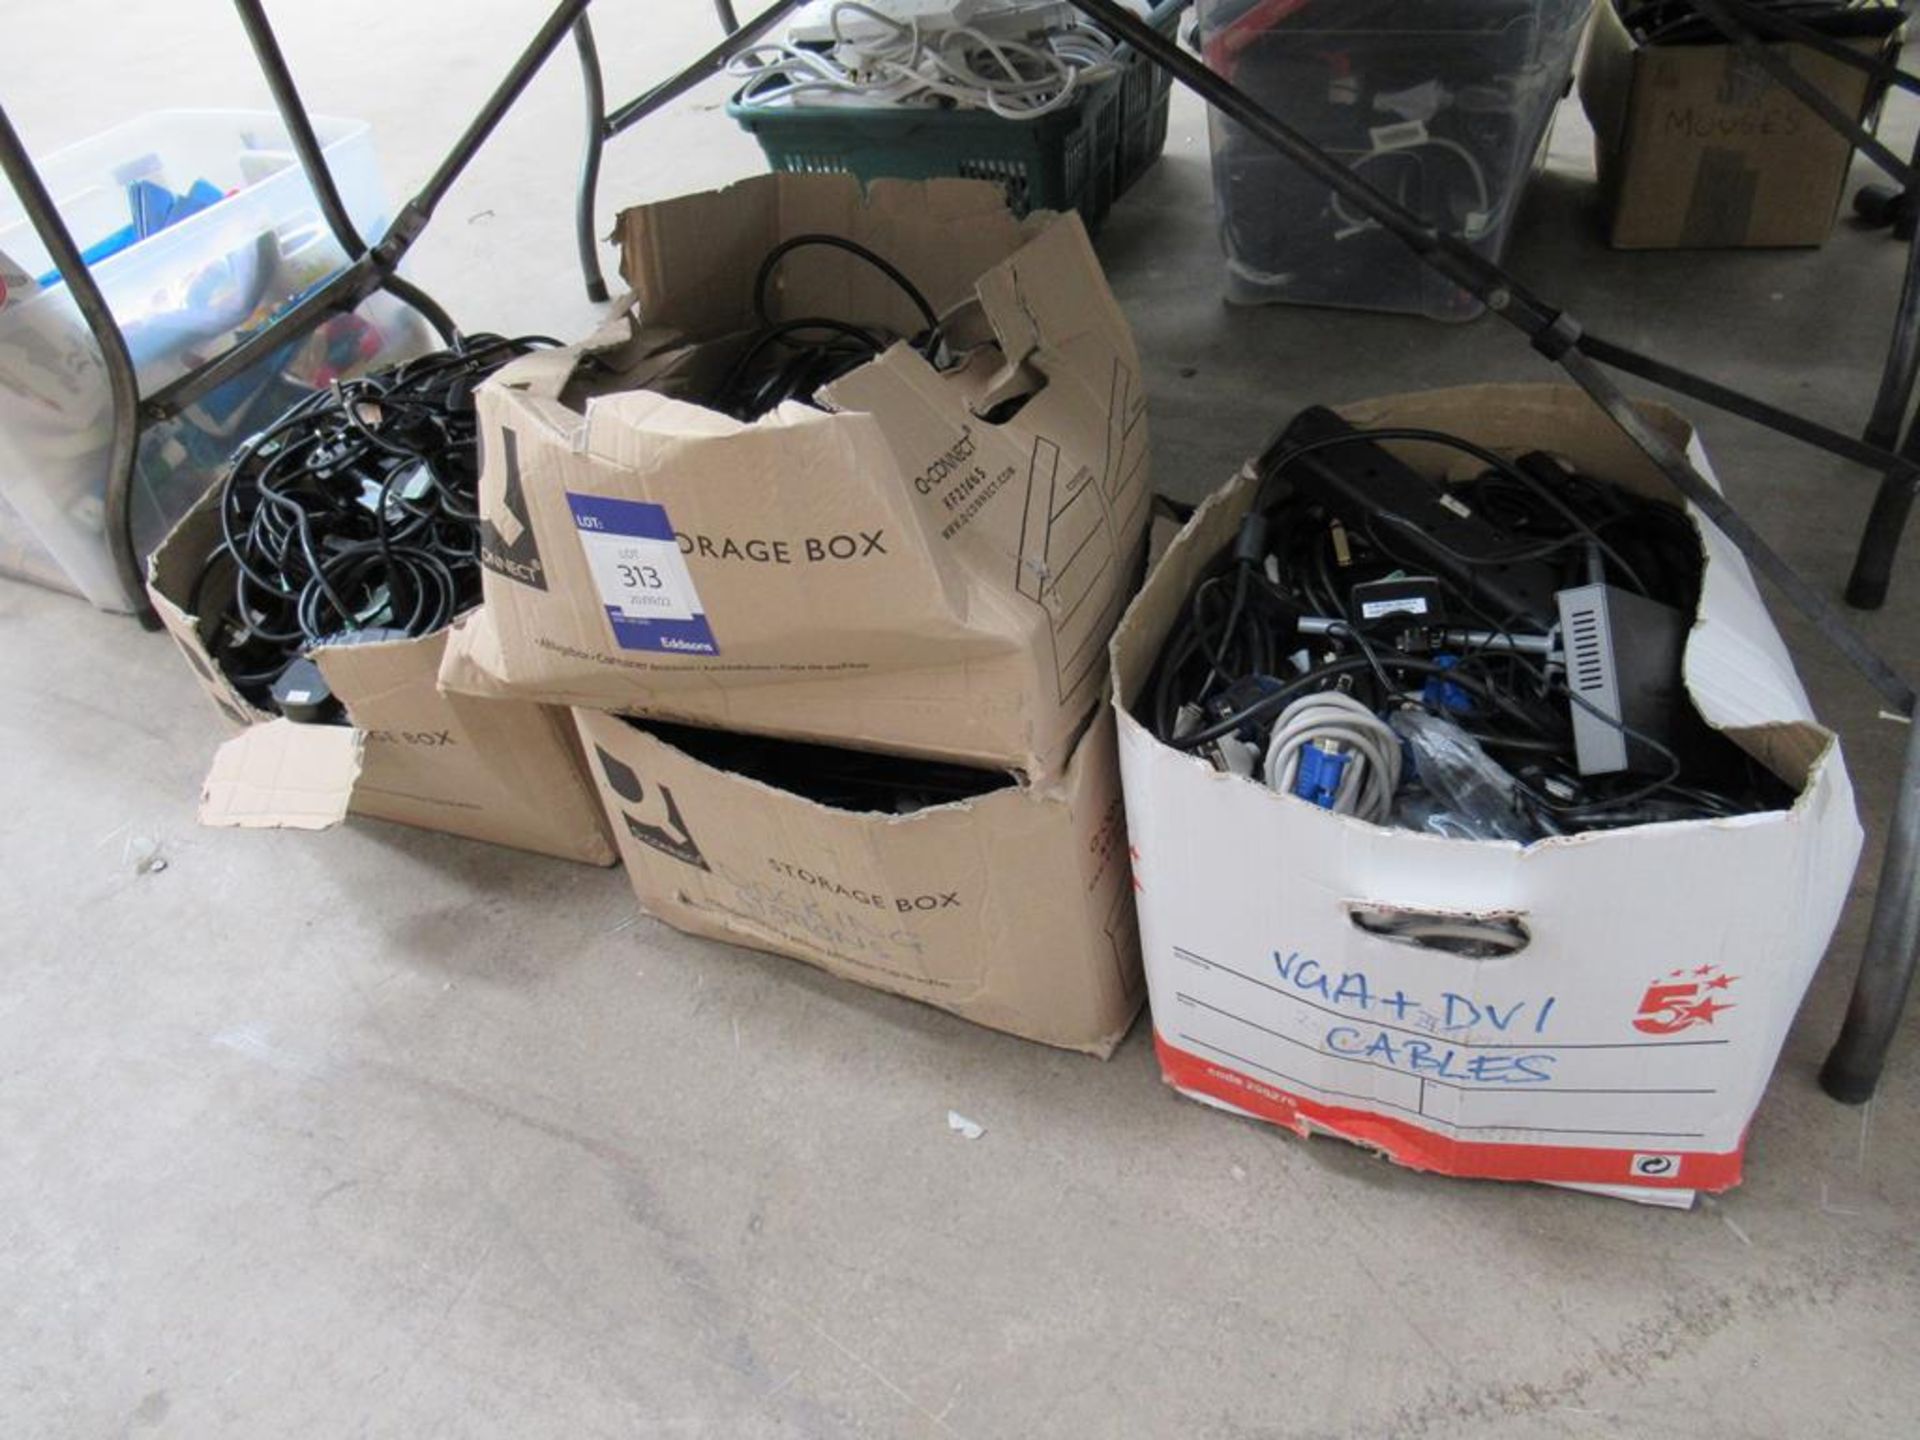 Large qty of various PC cables and couplats etc to 4 cardboard boxes